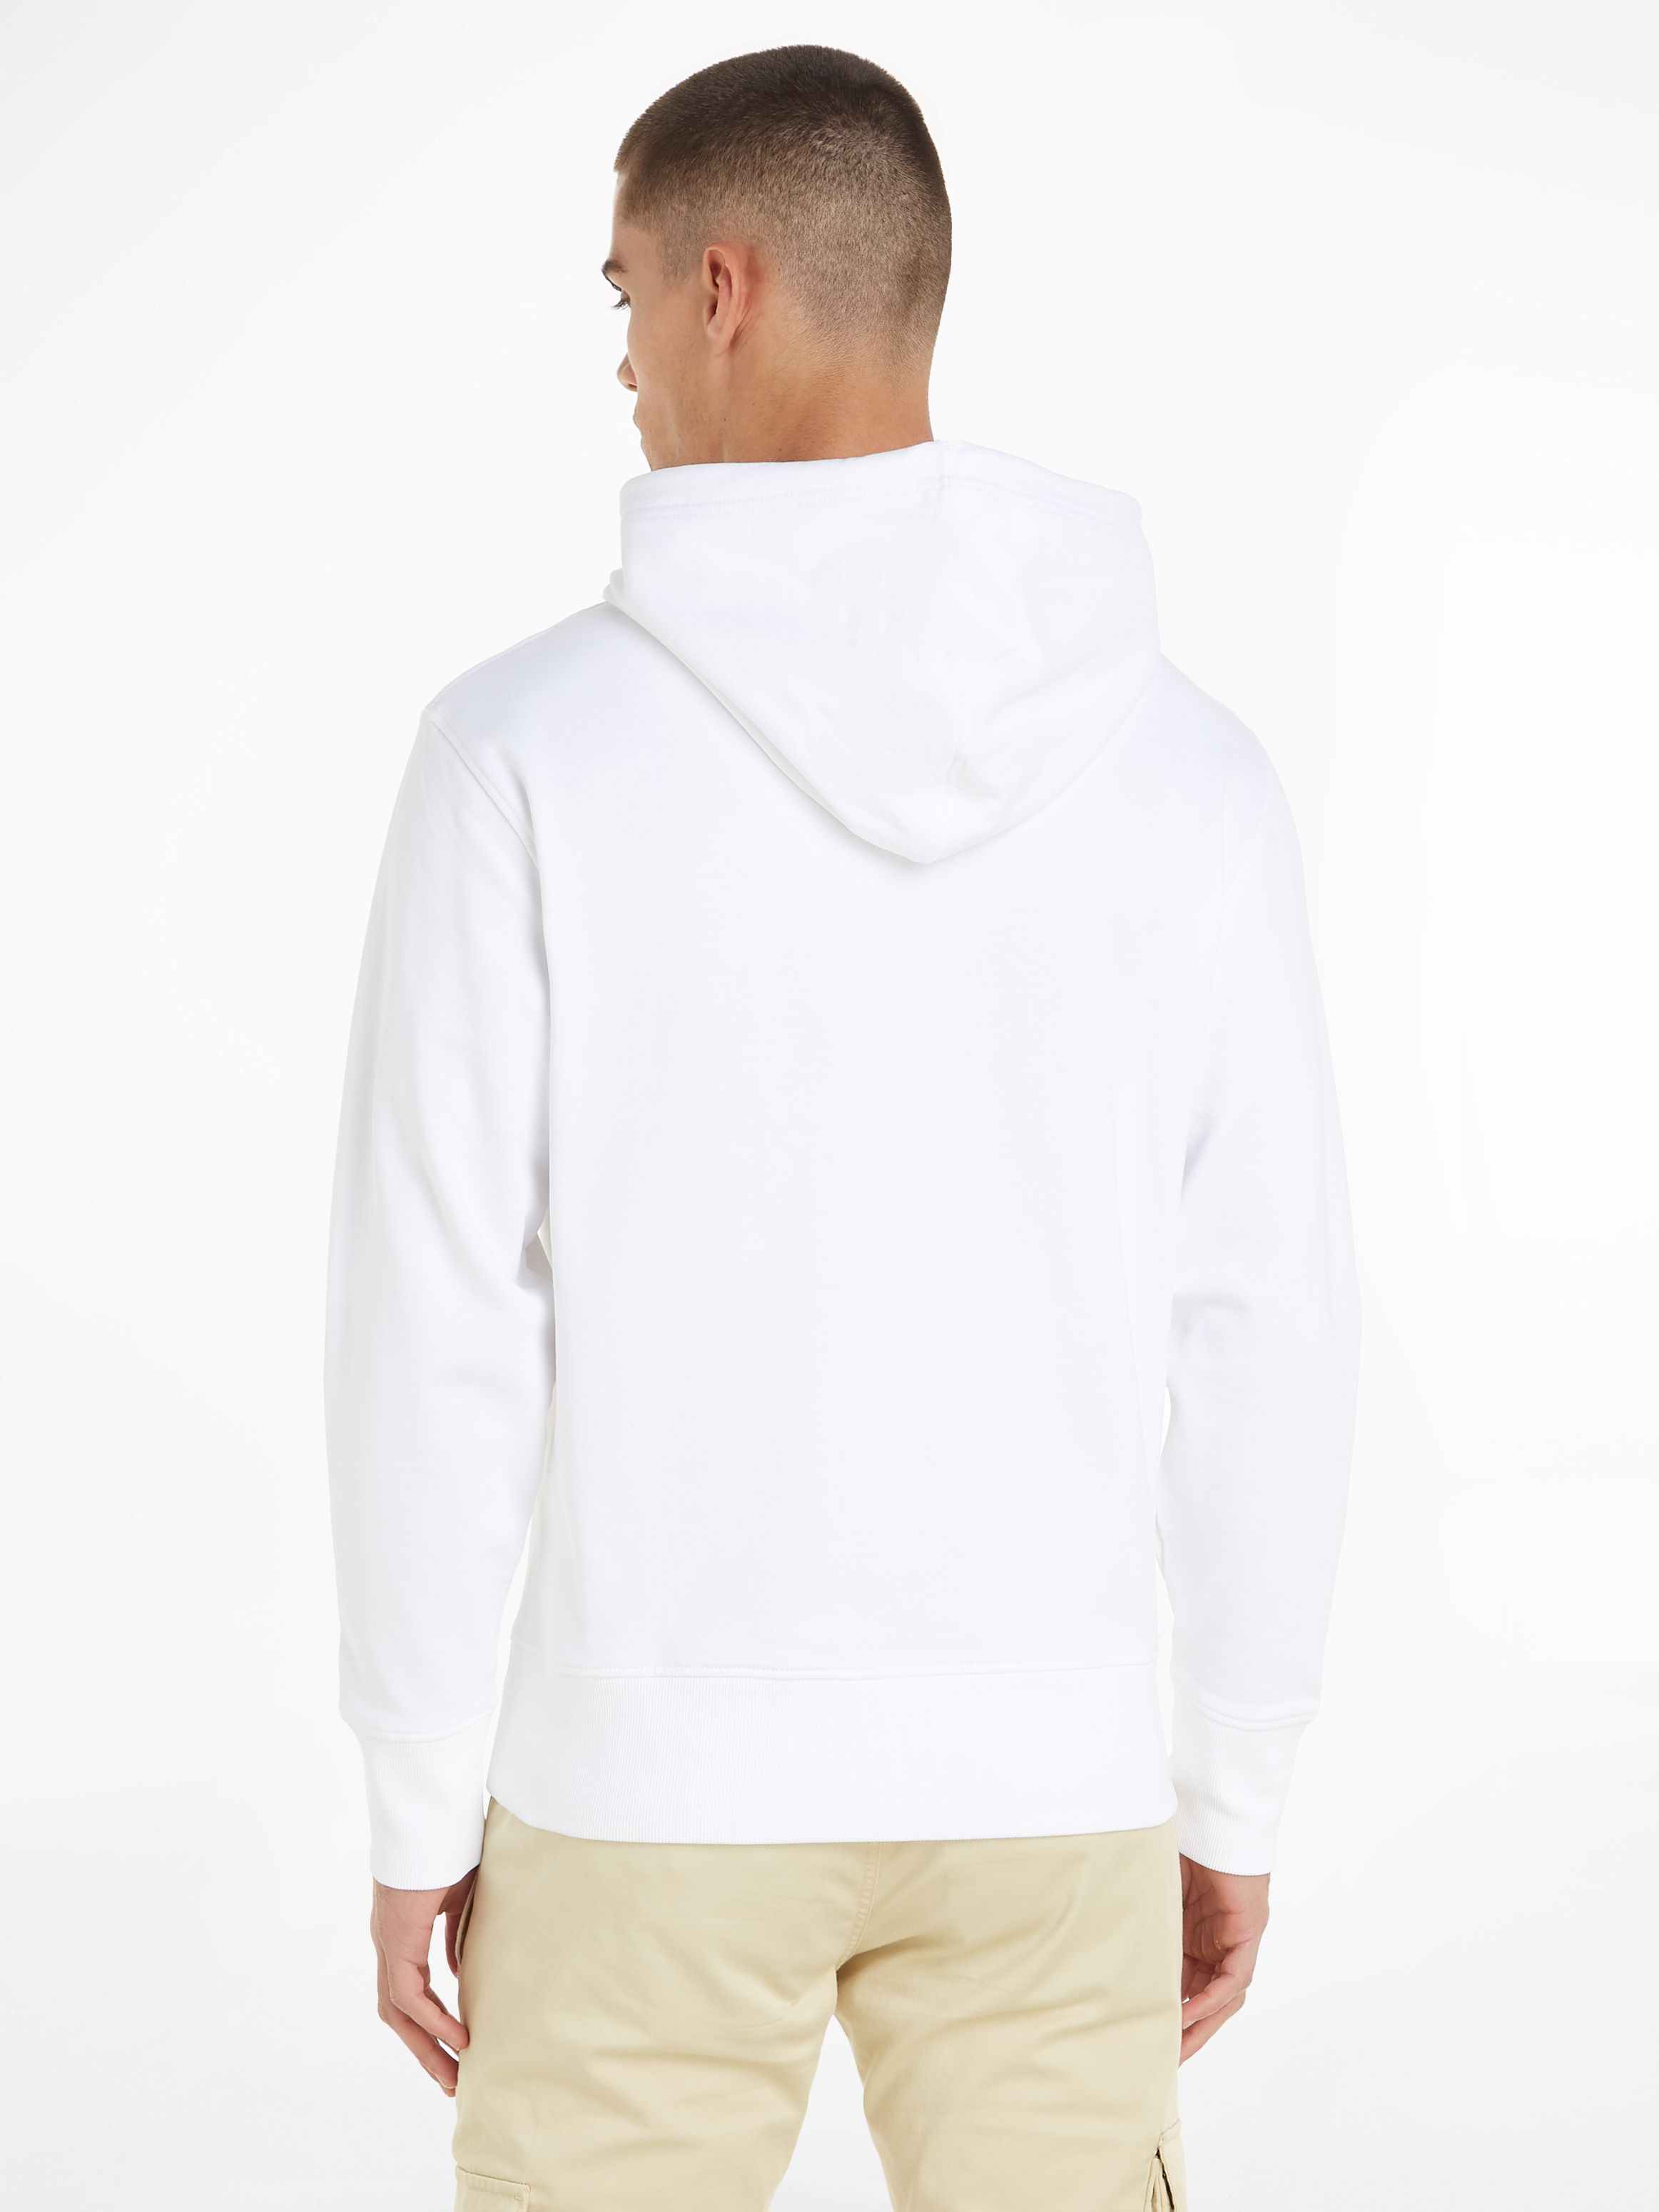 Calvin Klein Jeans Disrupted Outline Hoodie